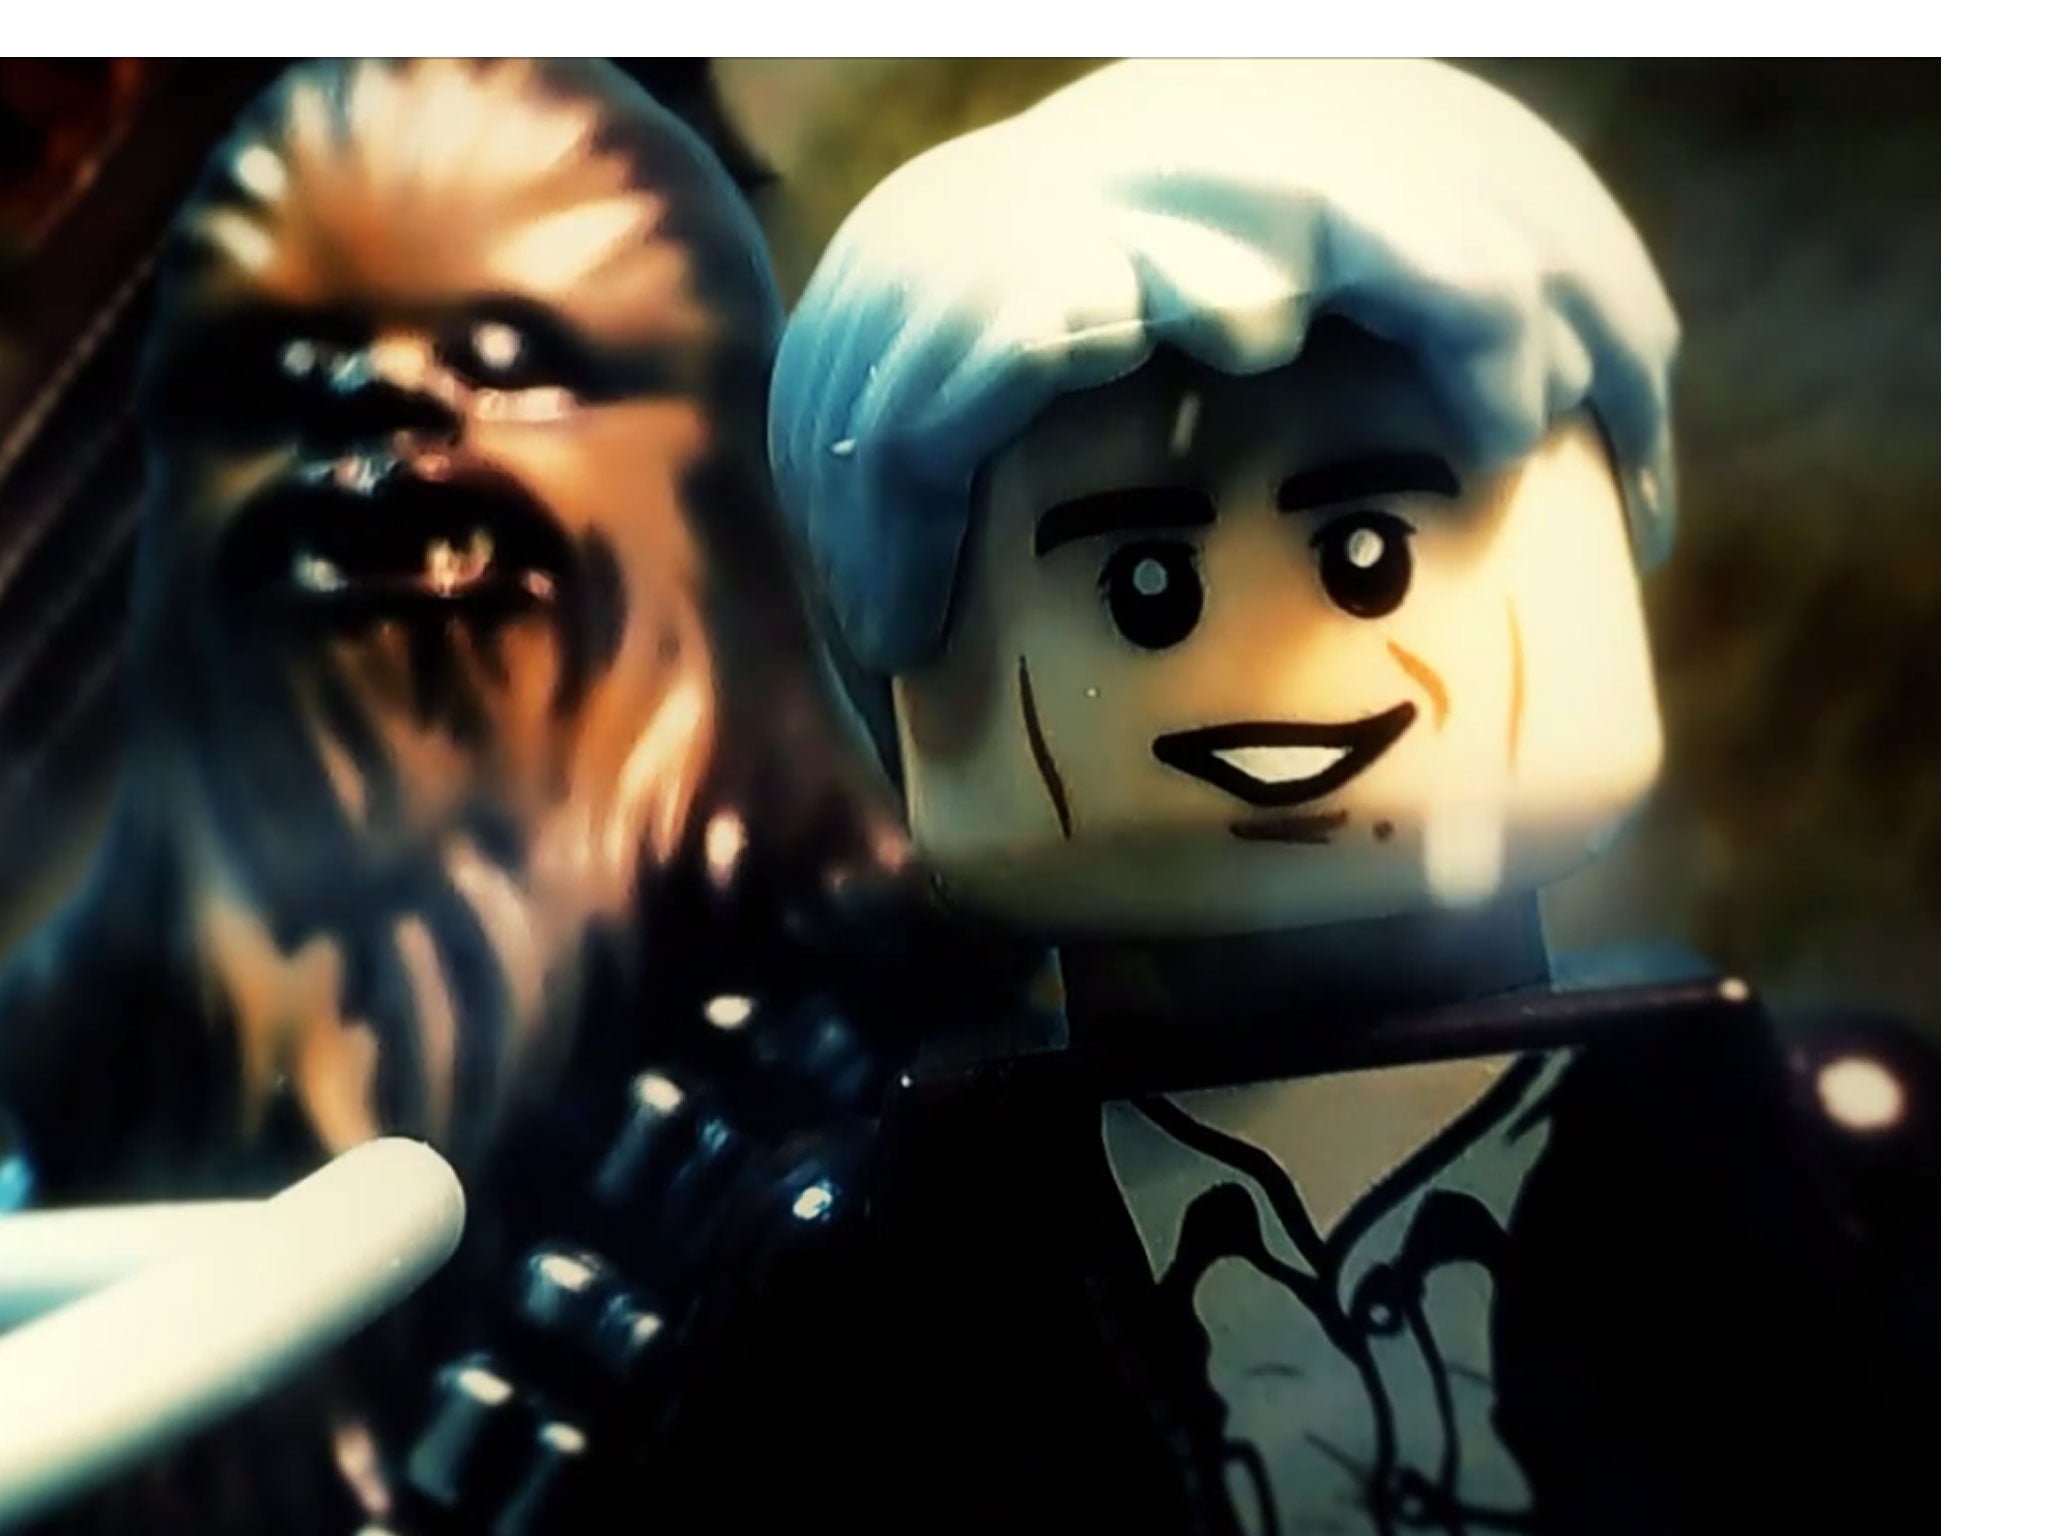 Lego Han Solo and Chewbacca from a remade fan trailer